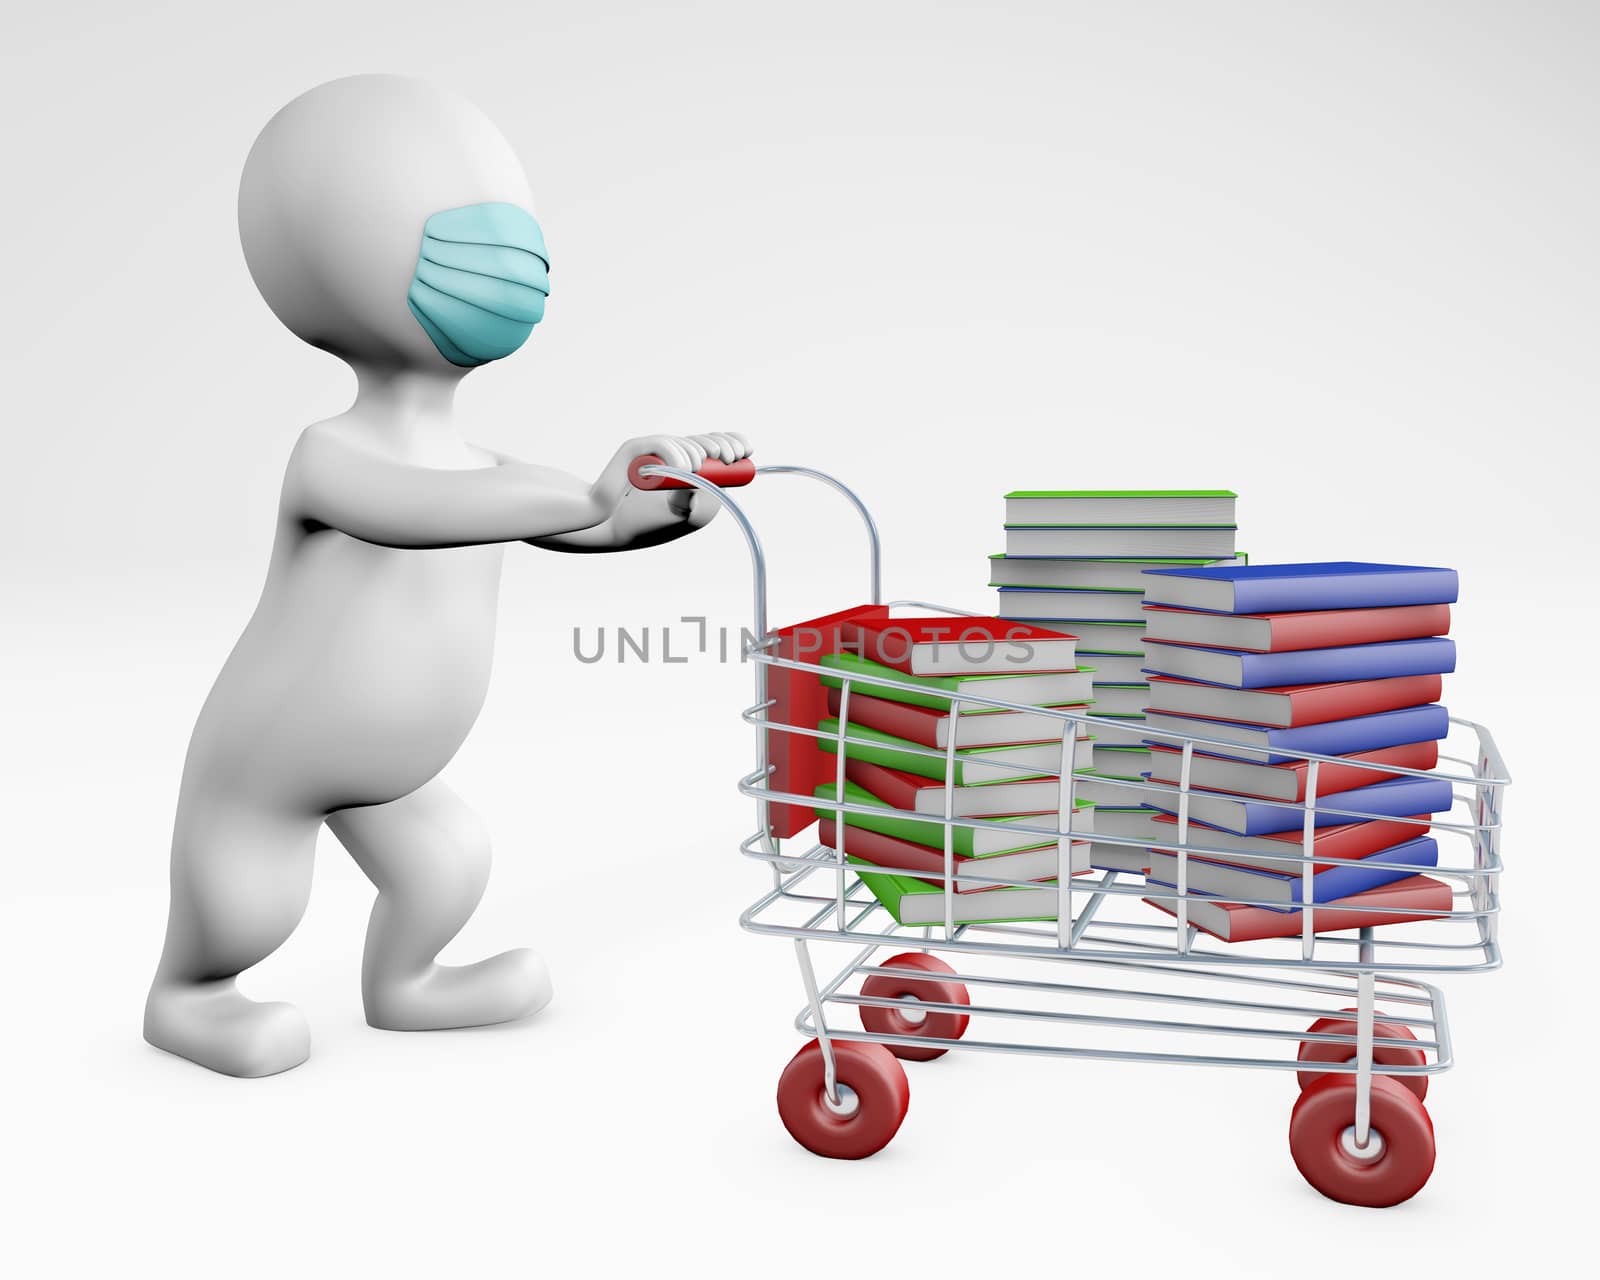 Man with a mask buying books 3d rendering by F1b0nacci